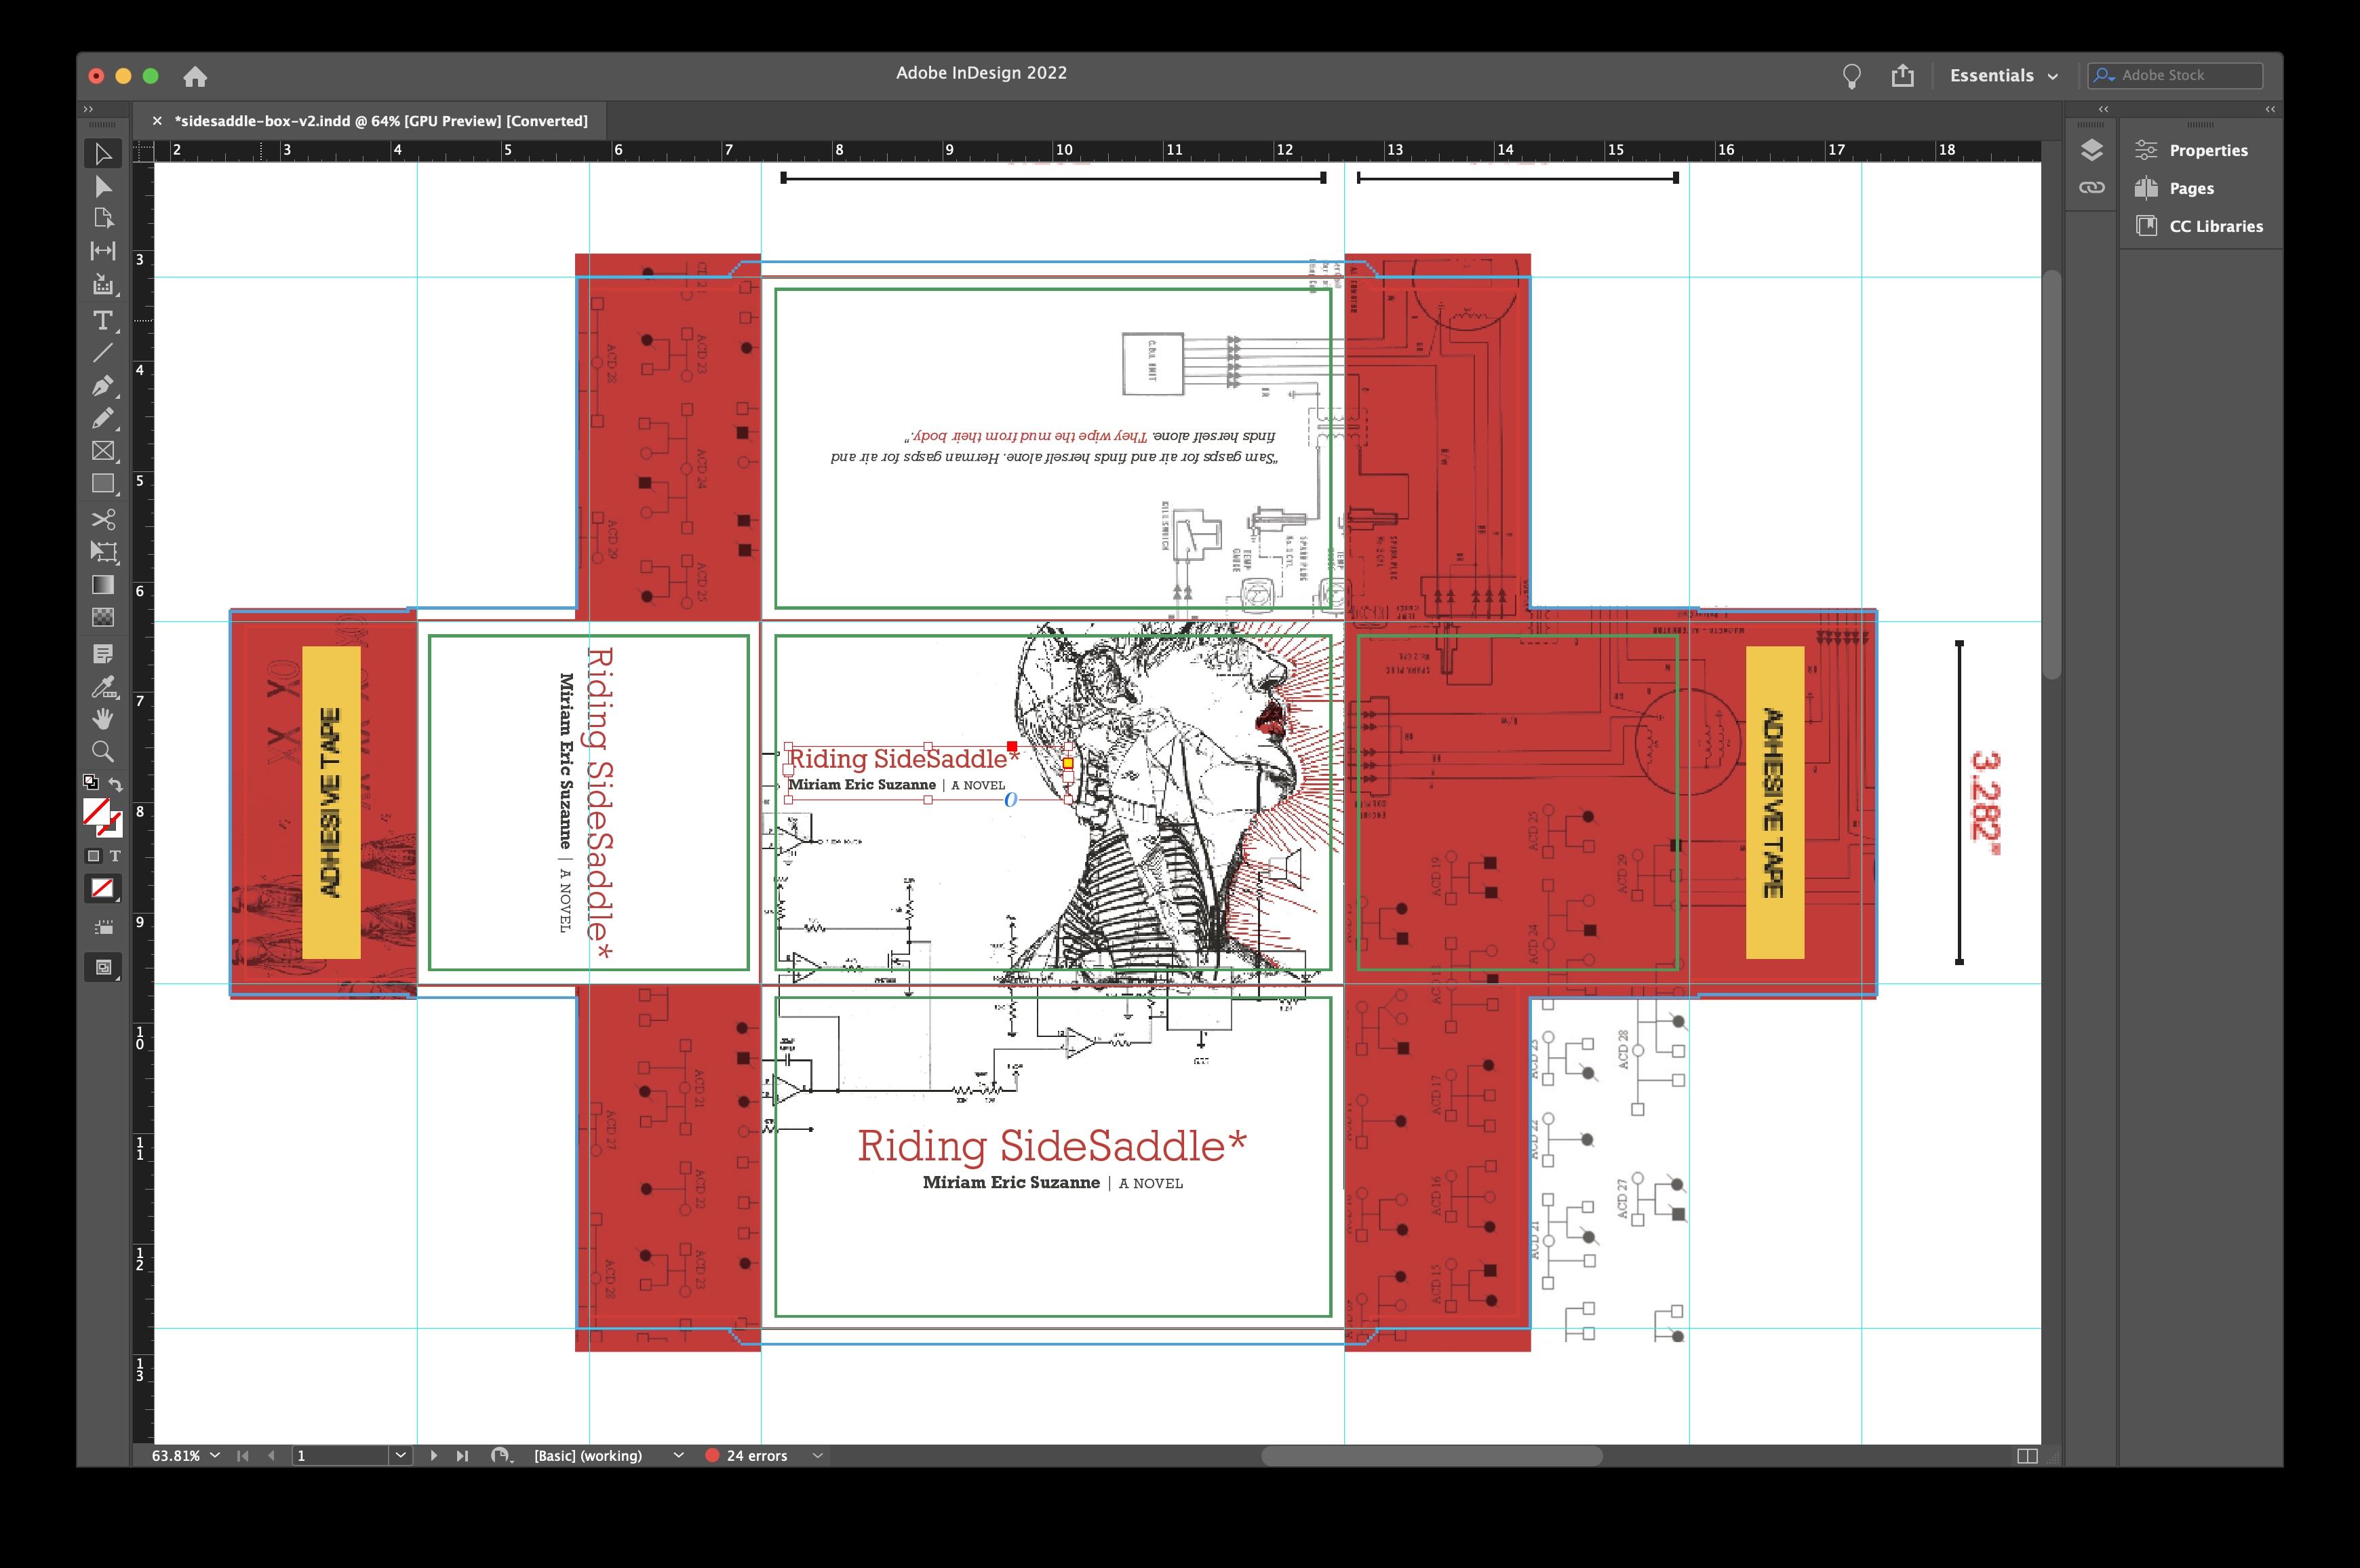 InDesign book-cover layout
for Riding SideSaddle,
my novel in a box
